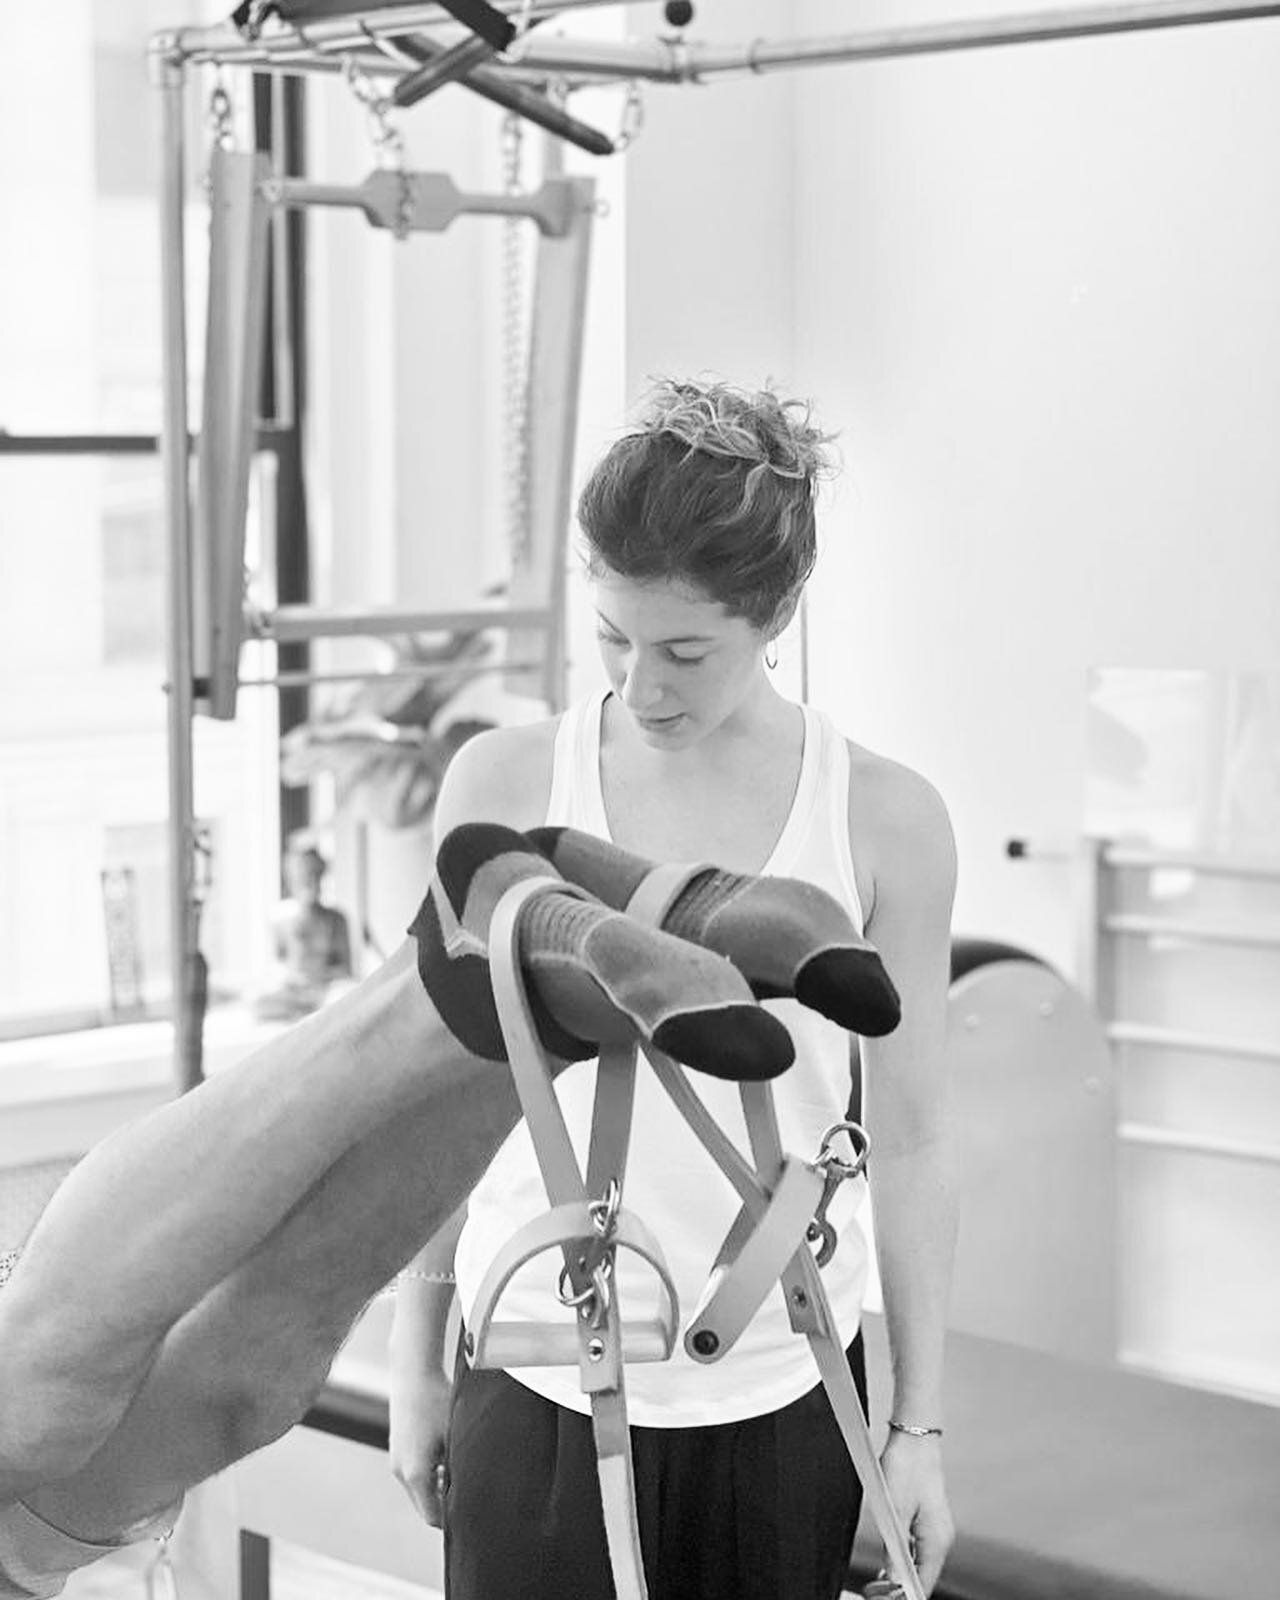 LAB Pilates NYC is proud to welcome Irene Paci from Pistoia, Italy! Irene was trained by Flora Lombardi, Regional Director of Romana's Pilates Italia, and then hired to work in her studio before relocating to NYC. We are so excited to have her on our